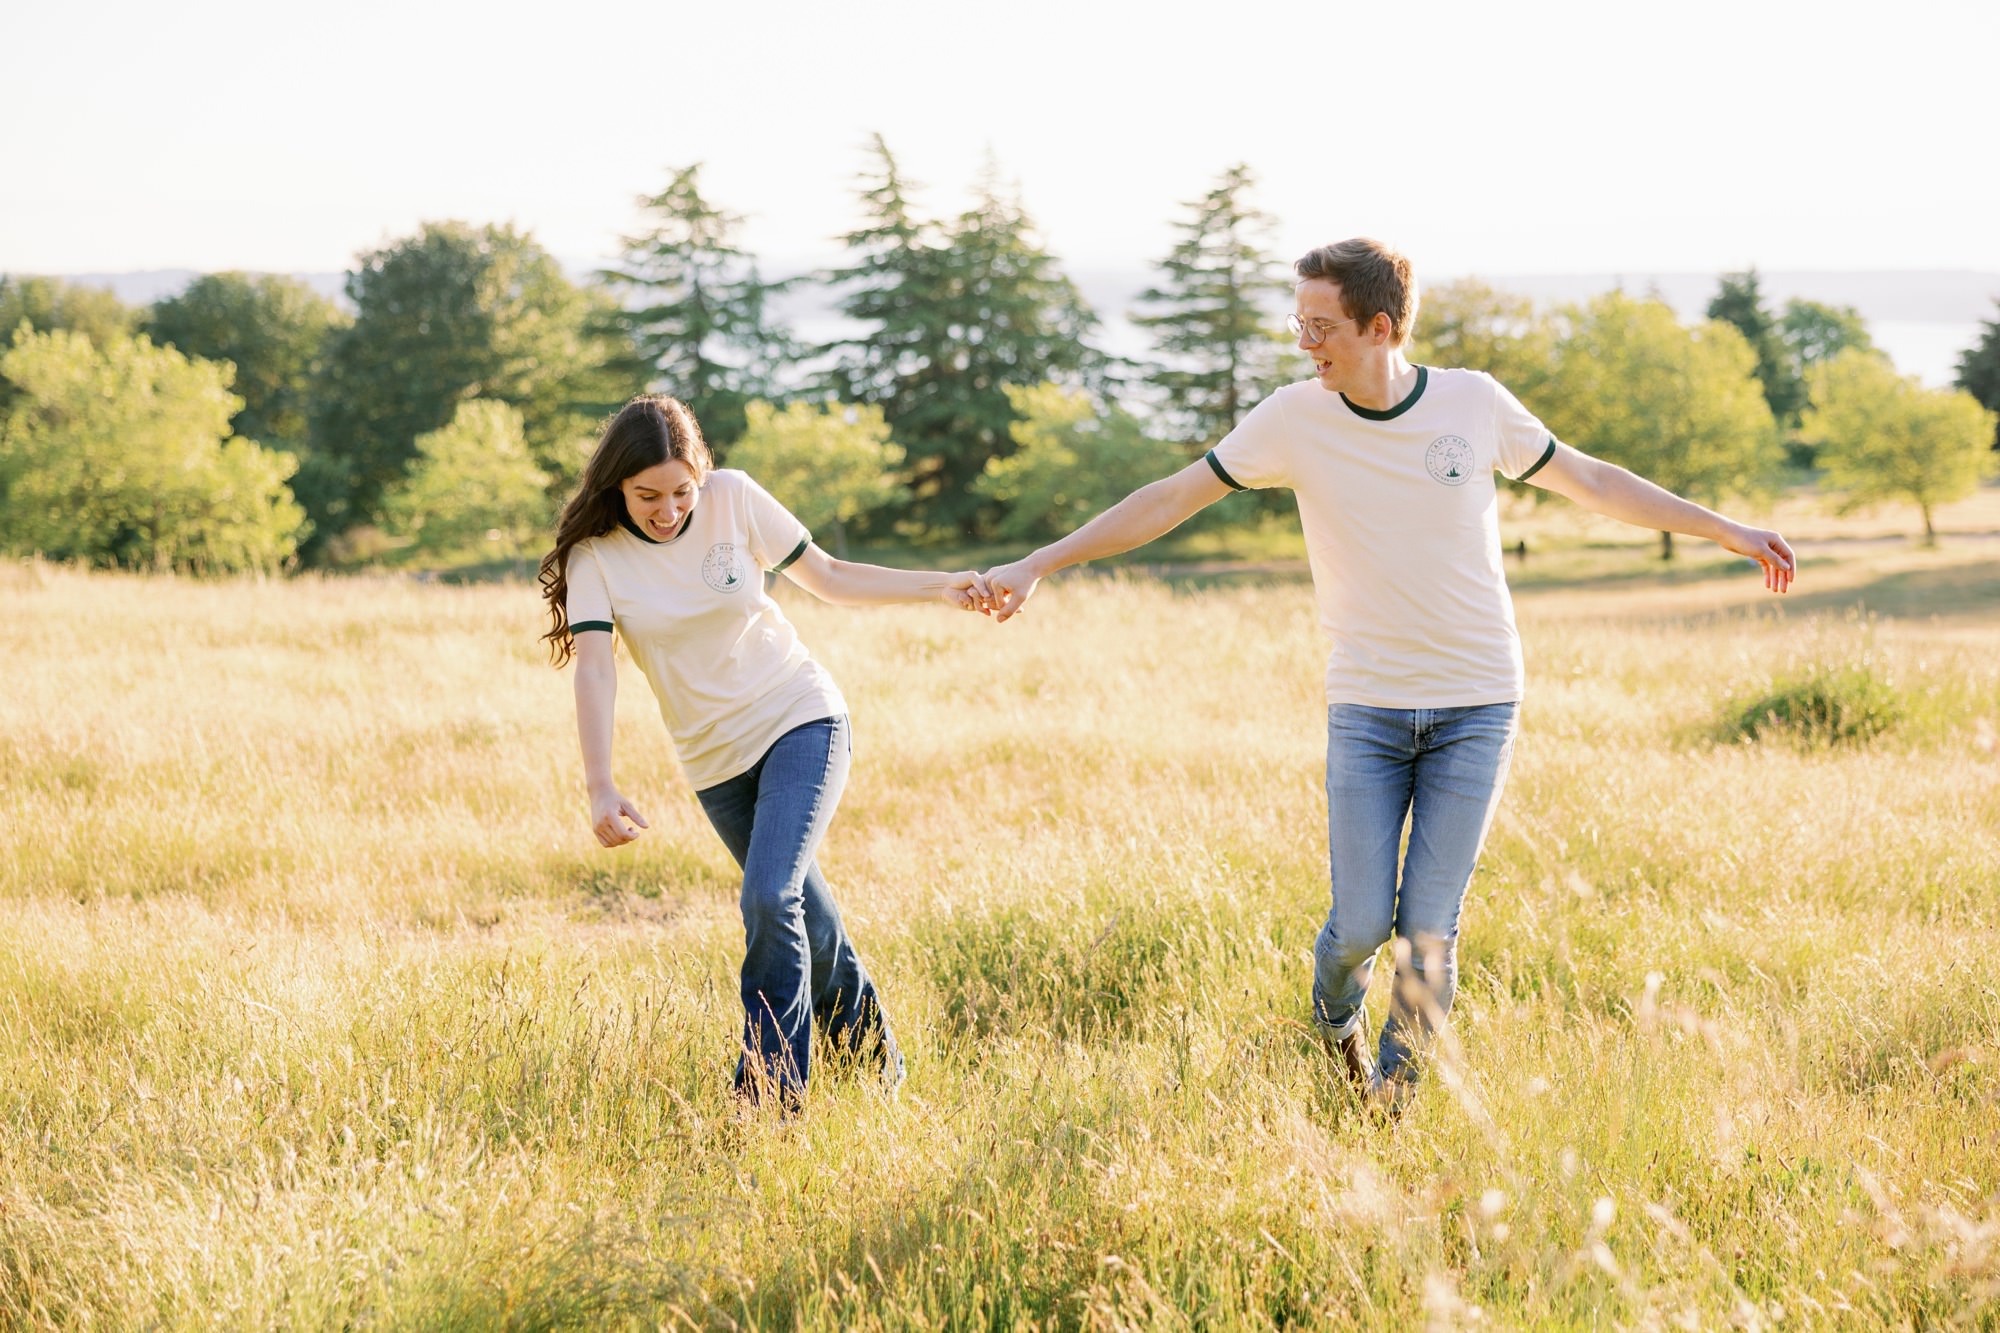 A couple in matching shirts playing and laughing in a grassy field at Discovery Park.